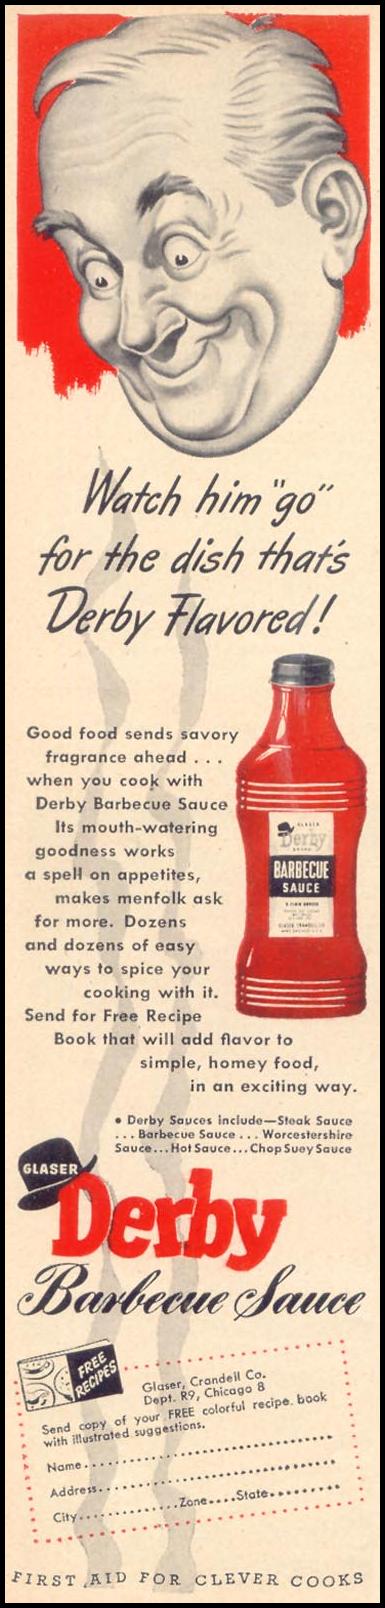 DERBY BARBECUE SAUCE
WOMAN'S DAY
09/01/1946
p. 60